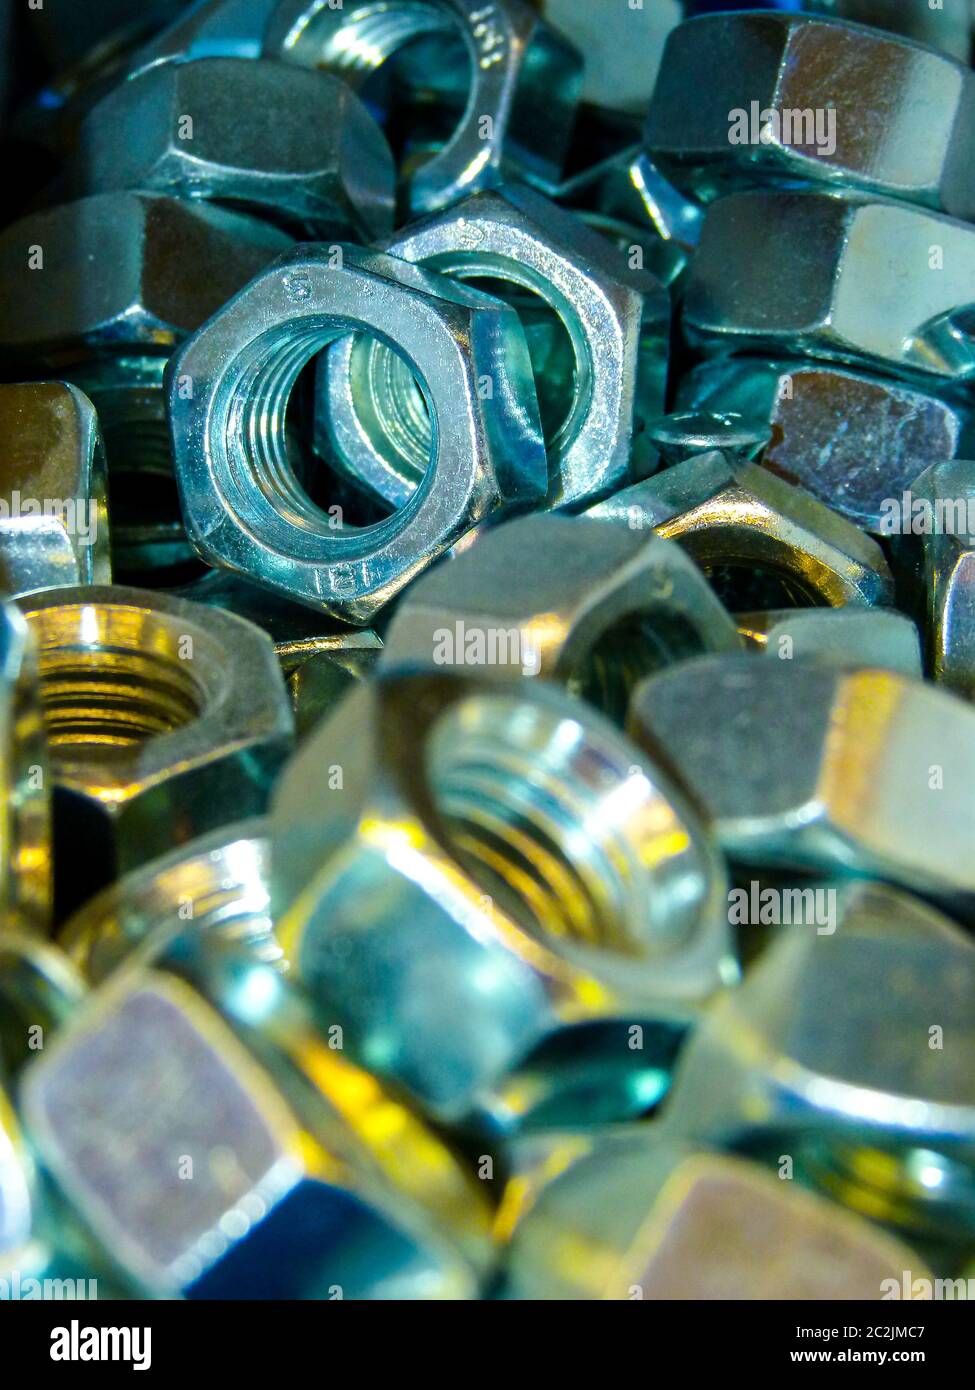 Hexagon nuts loose in sale box Stock Photo